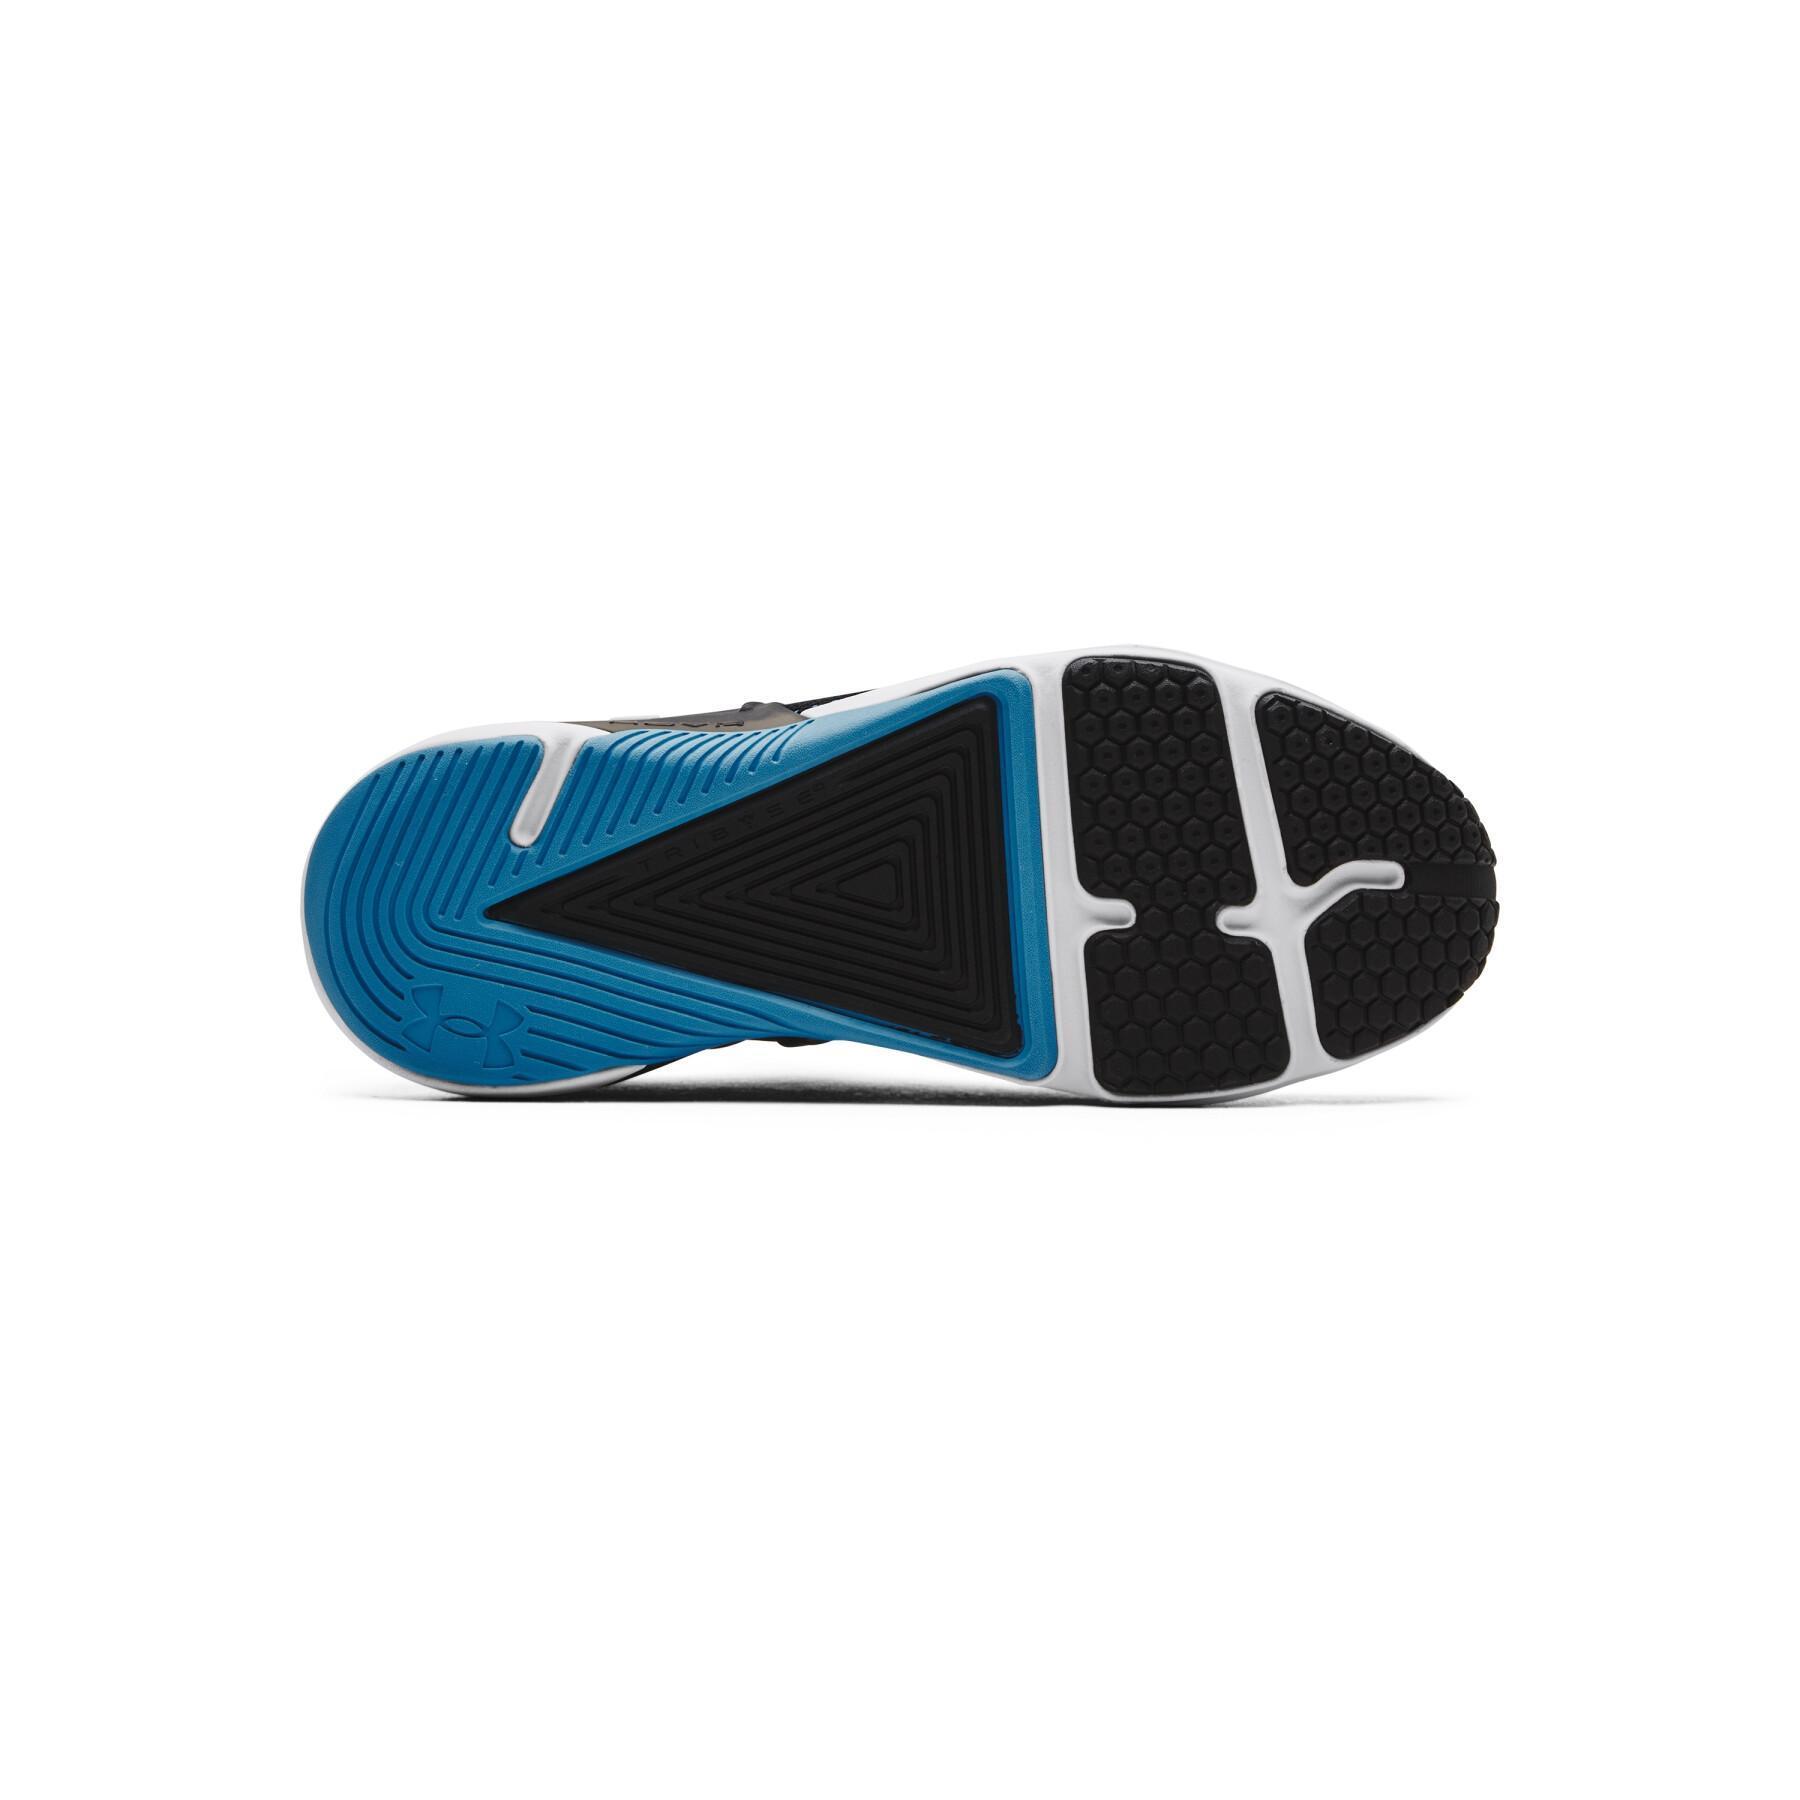 Shoes Under Armour HOVR Apex 3